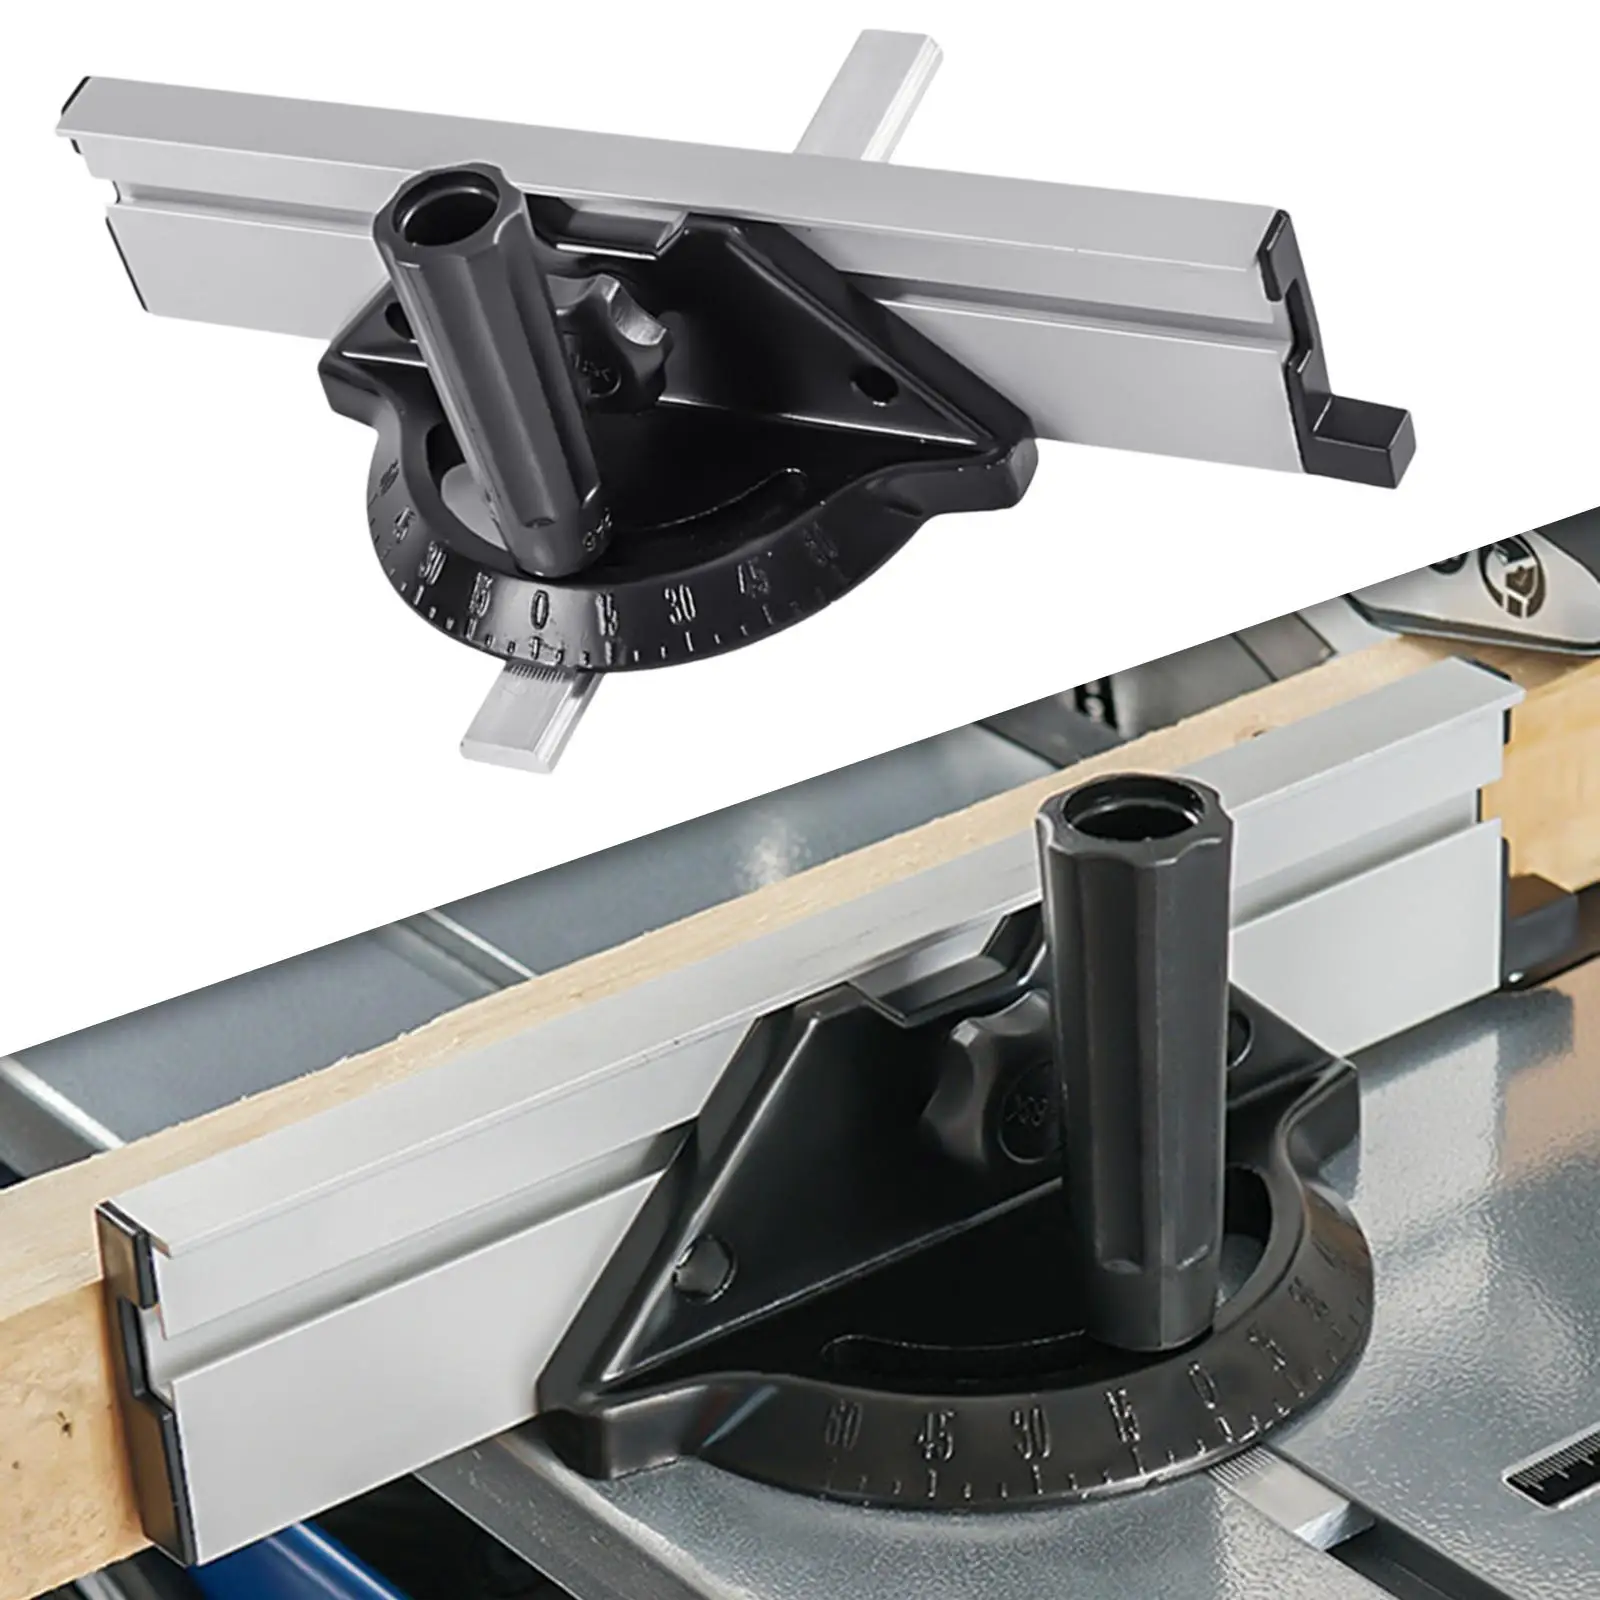 Miter Gauge Fence System ,Accurate Measurement with Repetitive Cut  for Router Table,Jointers